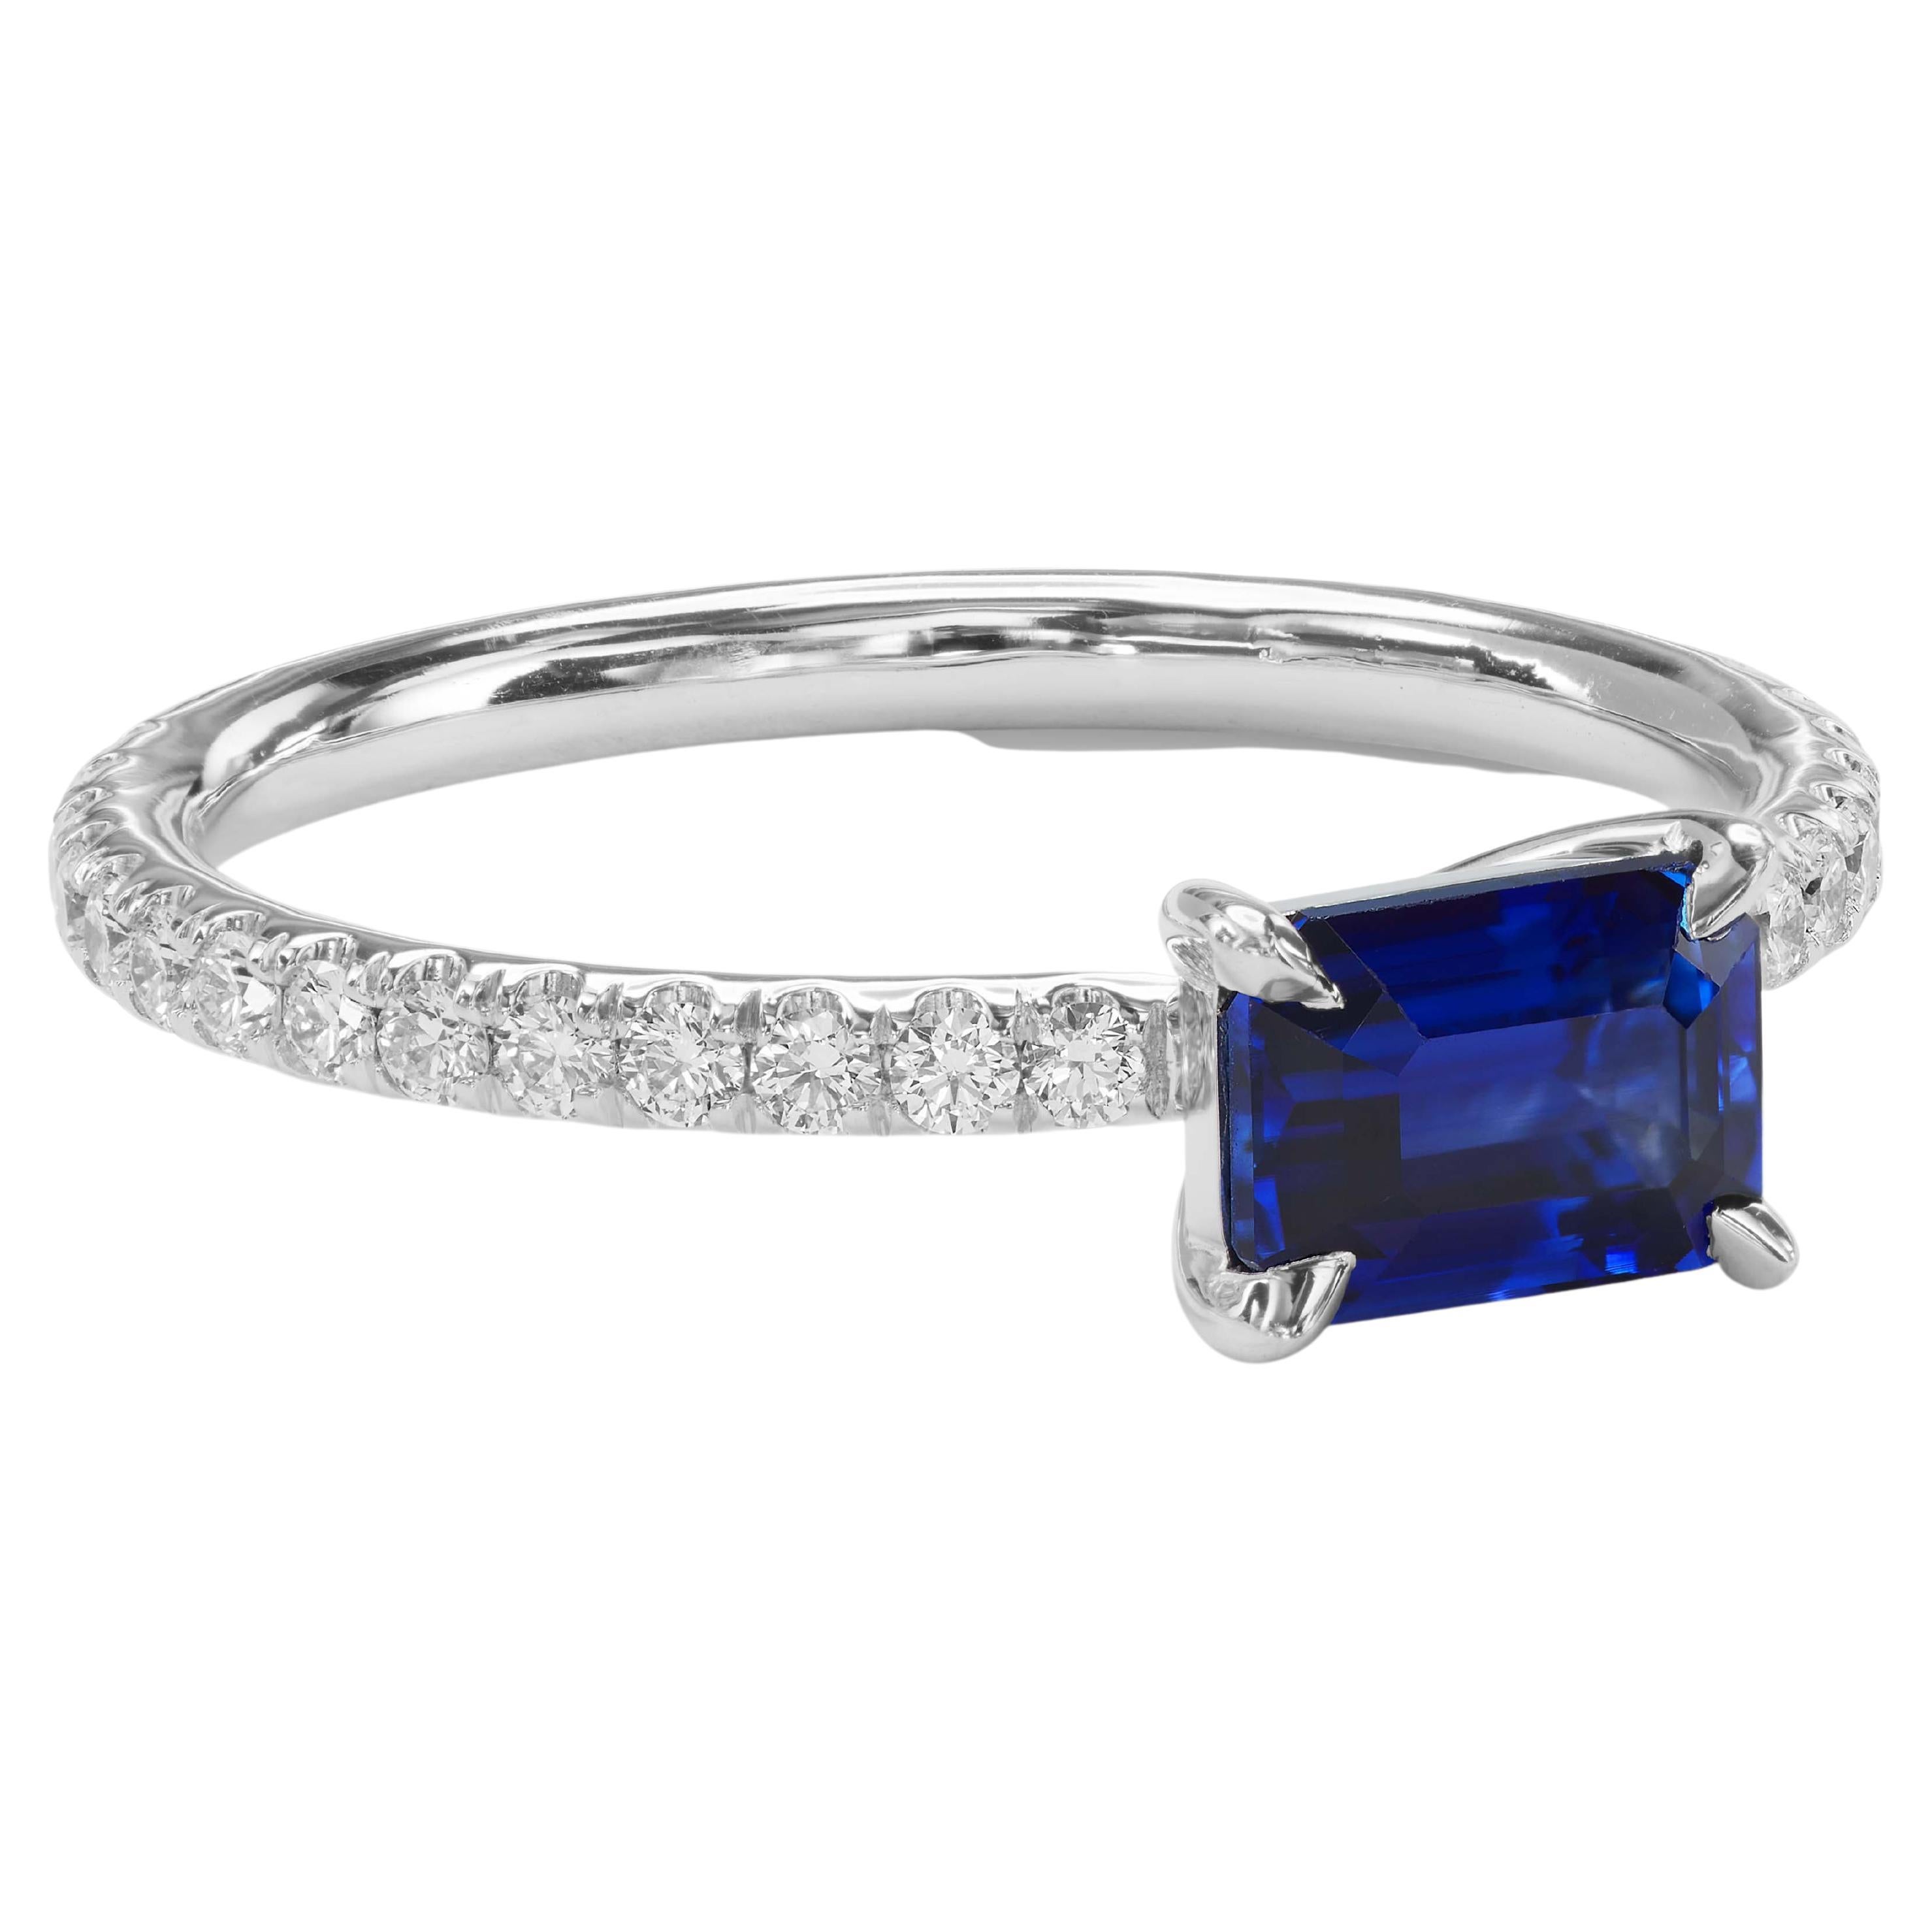 1 carat Blue Sapphire Ring with Pave Band